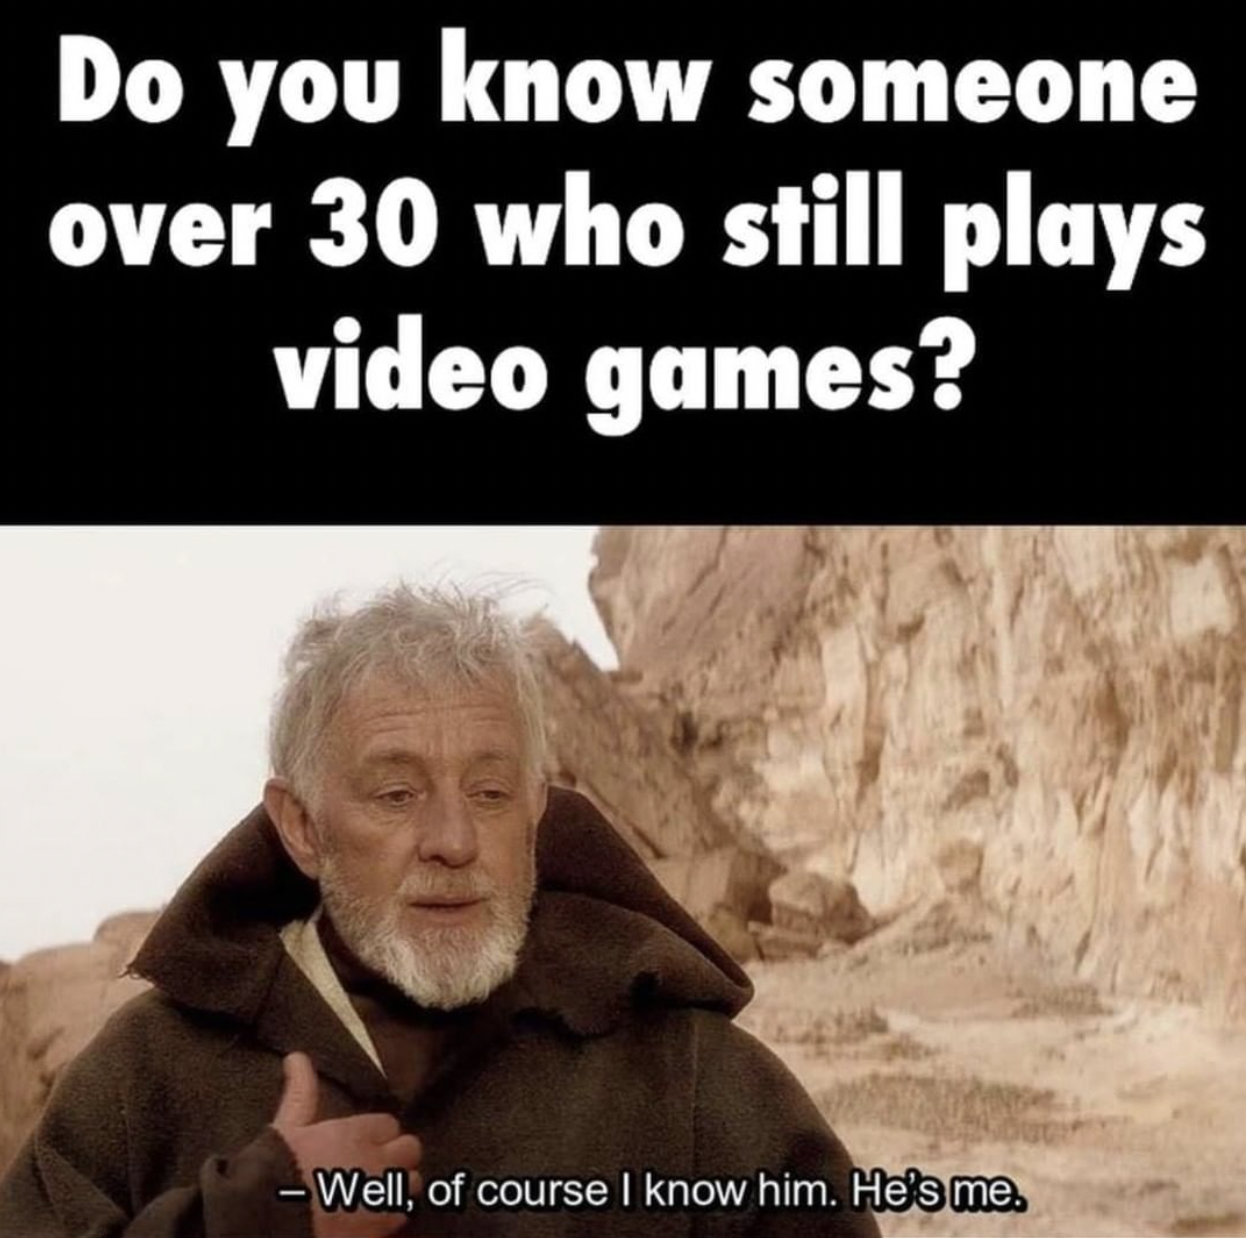 gaming memes - play video games meme - Do you know someone over 30 who still plays video games? Well, of course I know him. He's me.